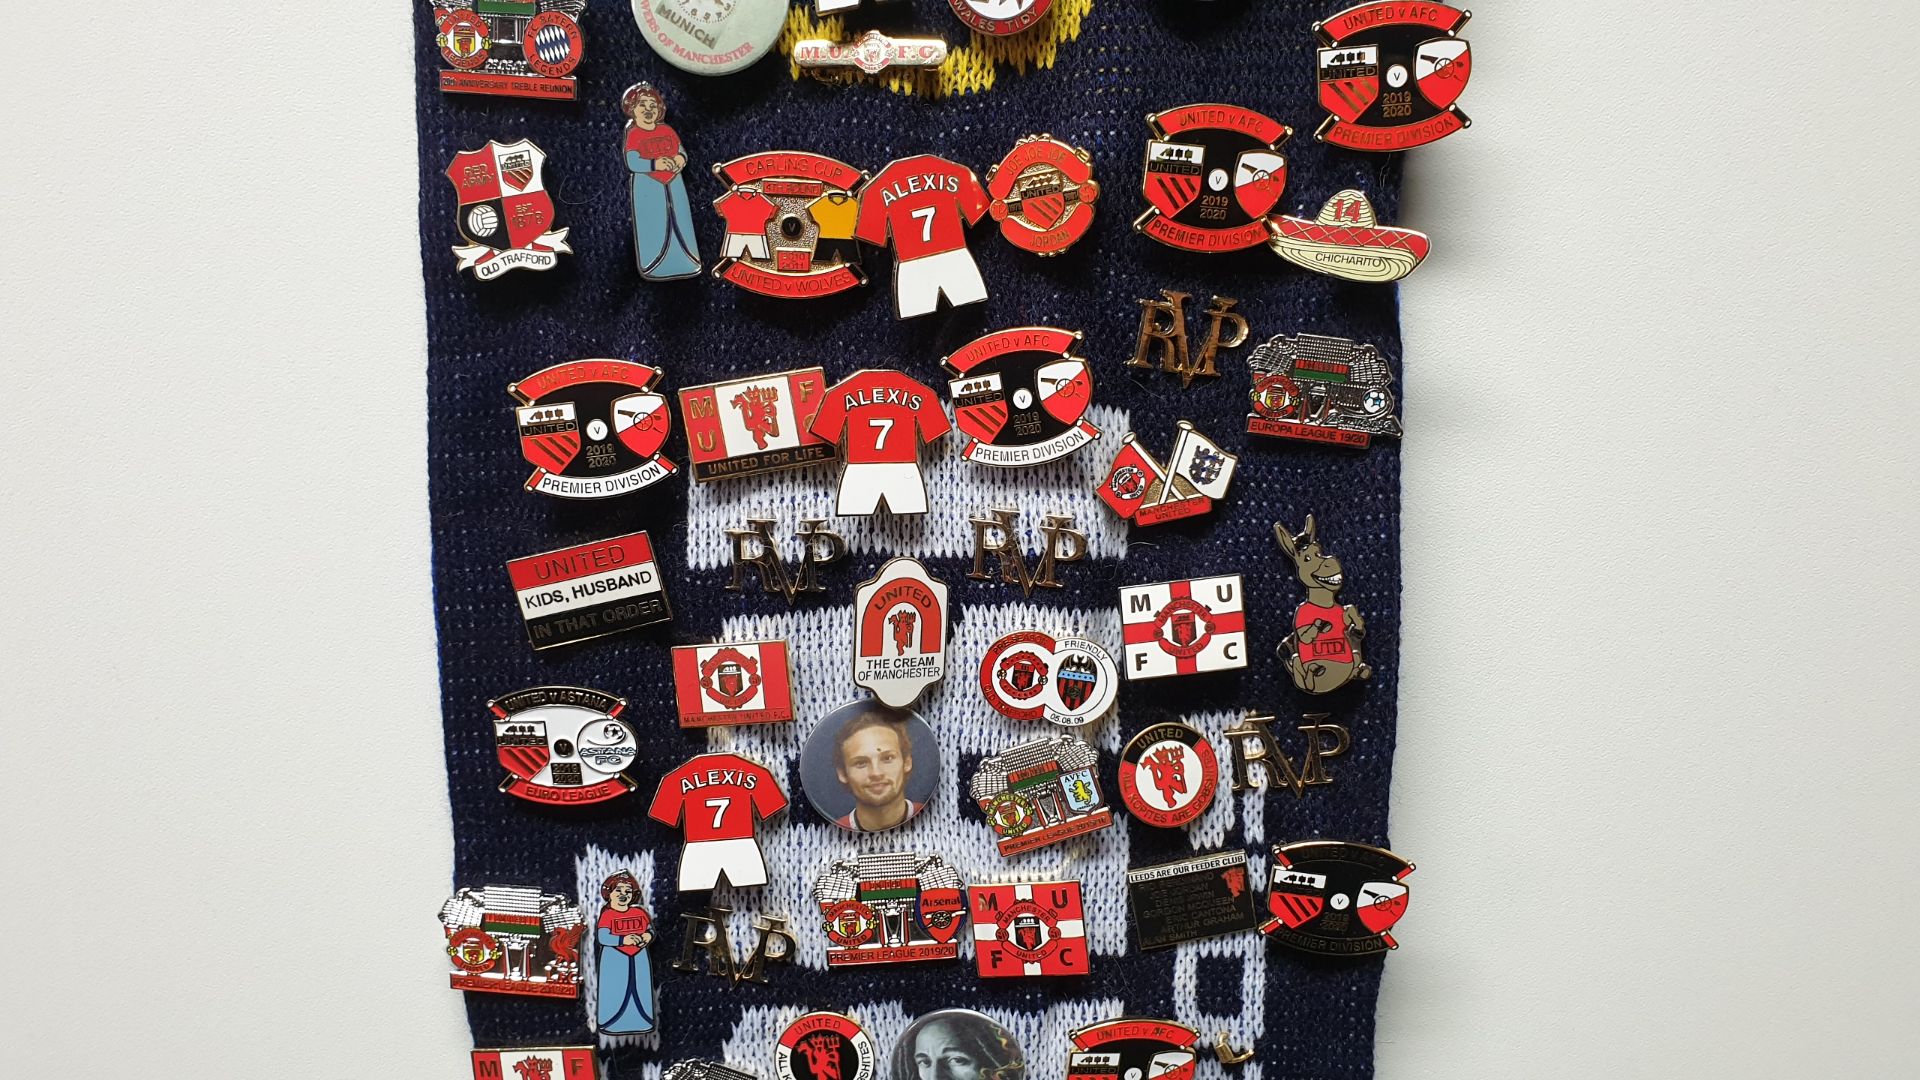 MANCHESTER UNITED SCARF CONTAINING APPROX 220 X PIN BADGES IE MUFC, OLD TRAFFORD, WE HATE CITY, EURO - Image 3 of 8